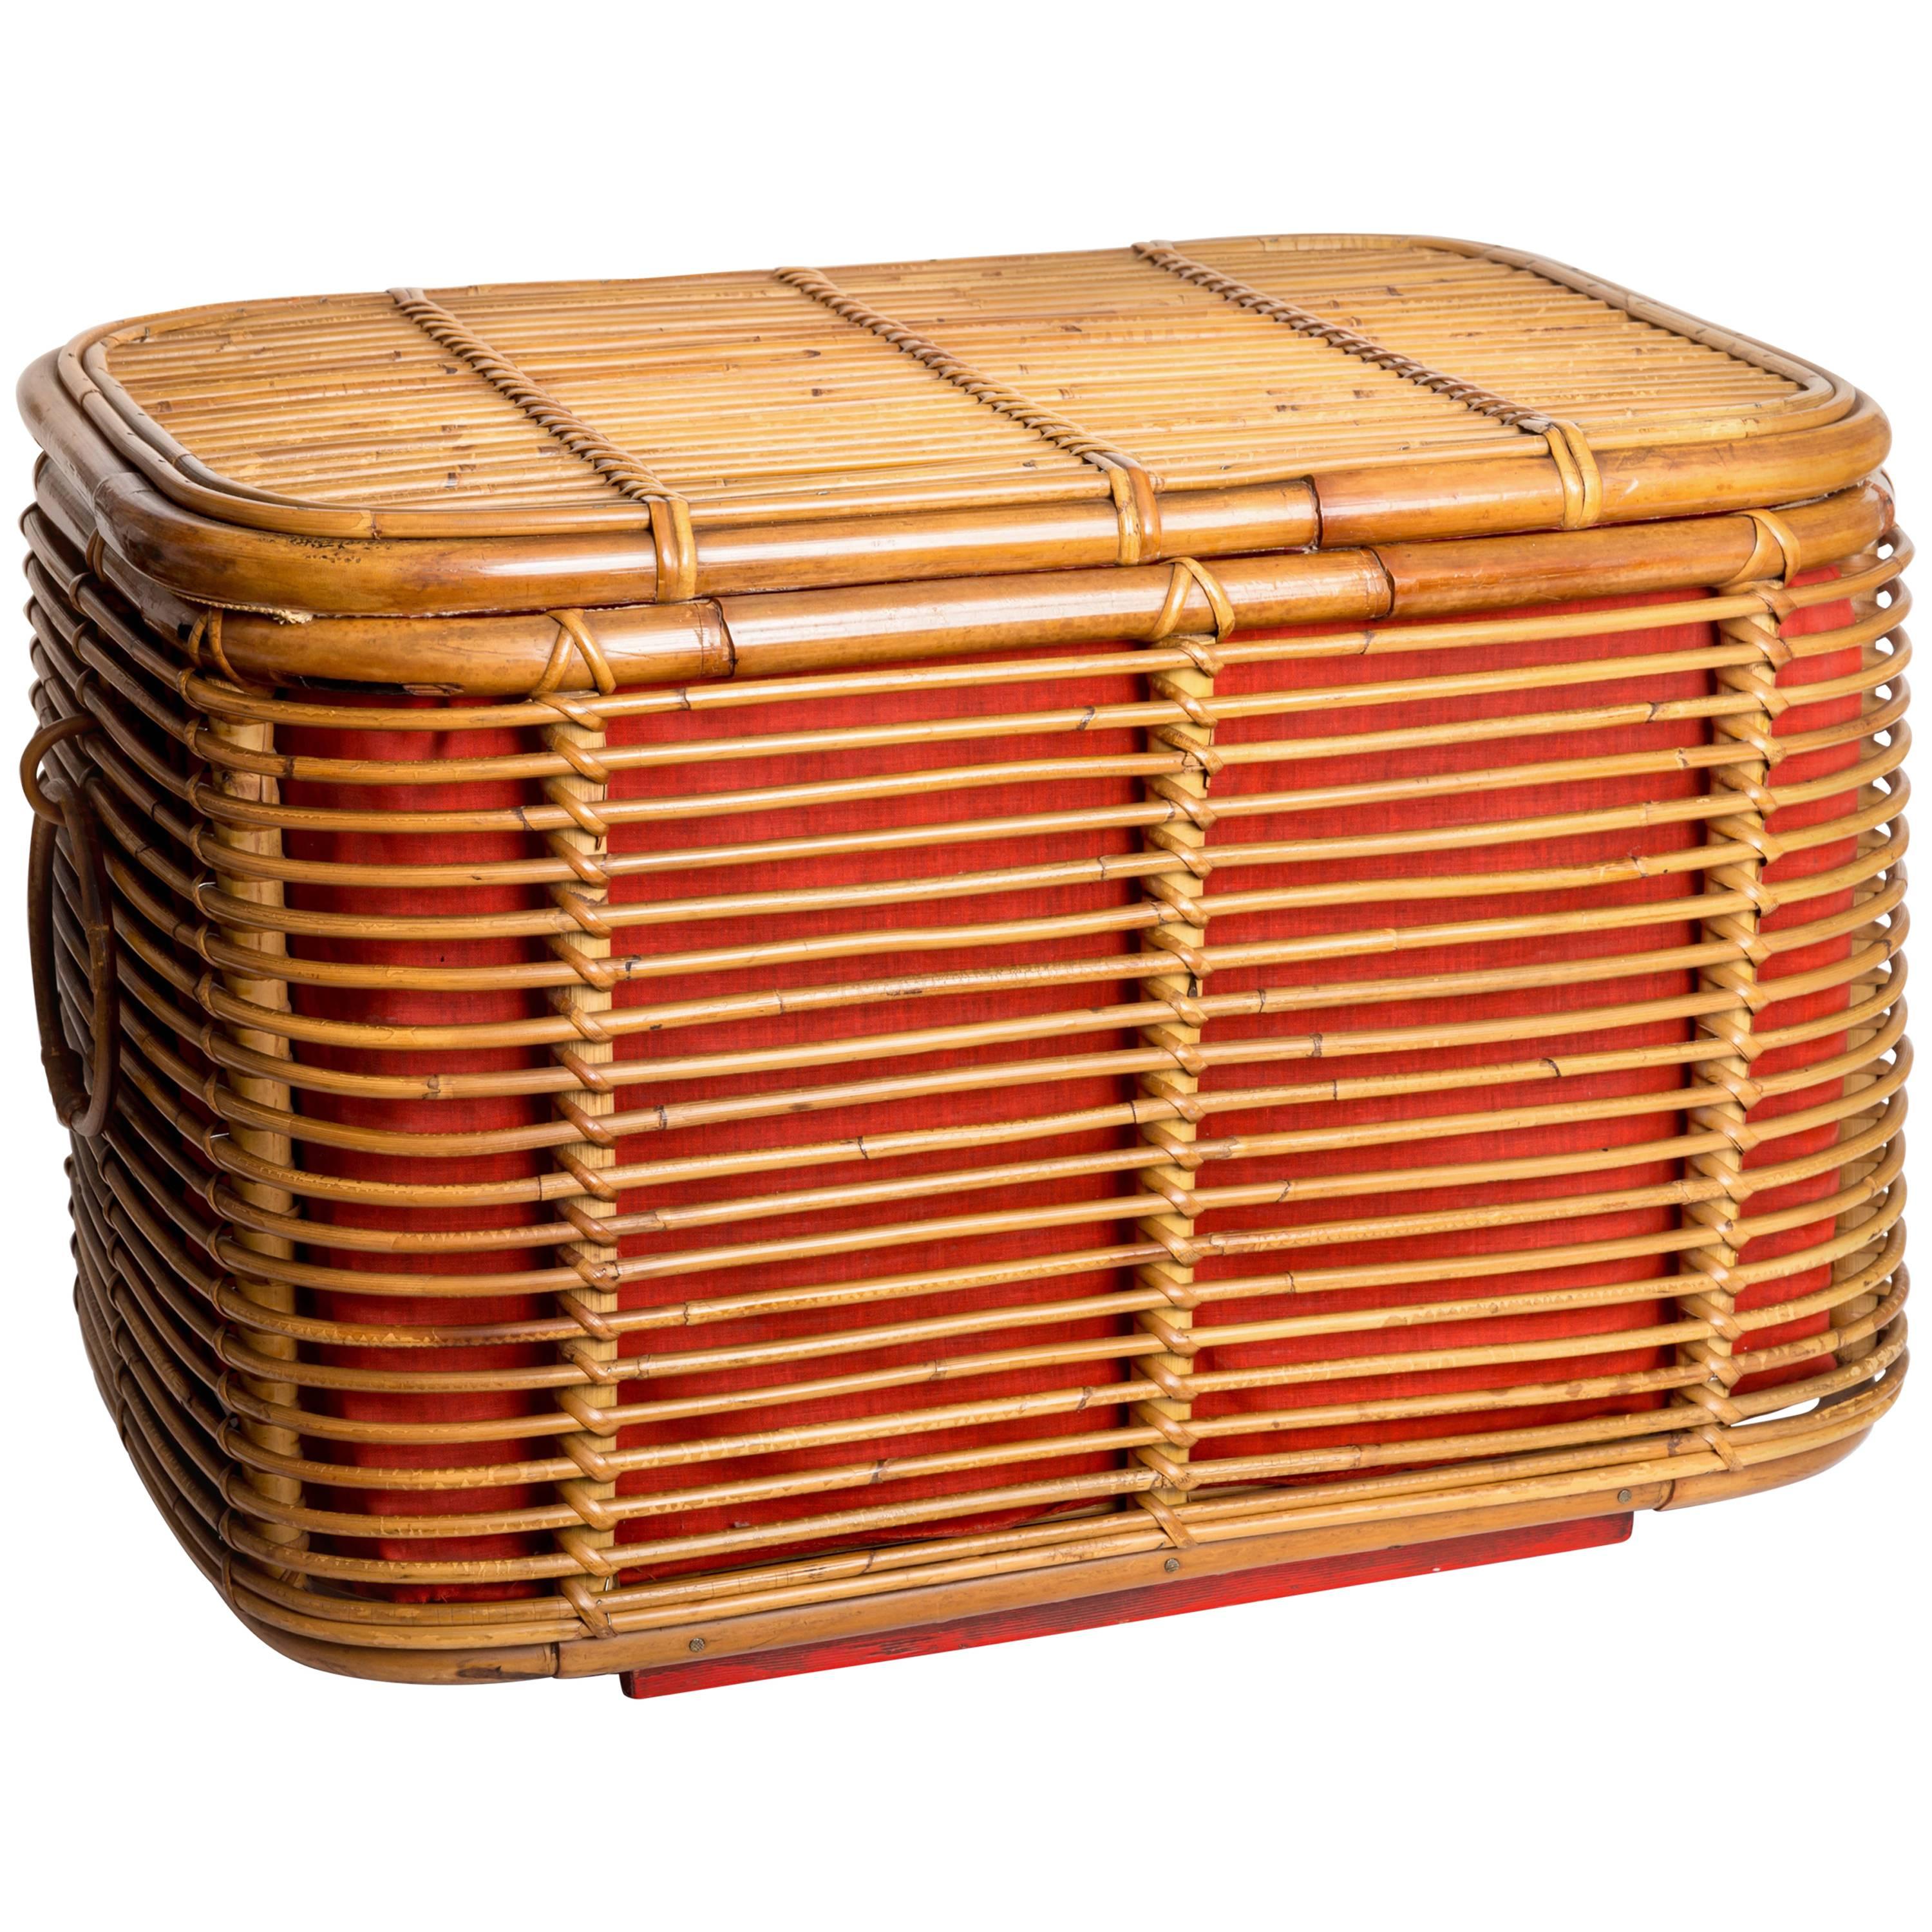 Rattan Ottoman or Storage Chest with Fabric Lining